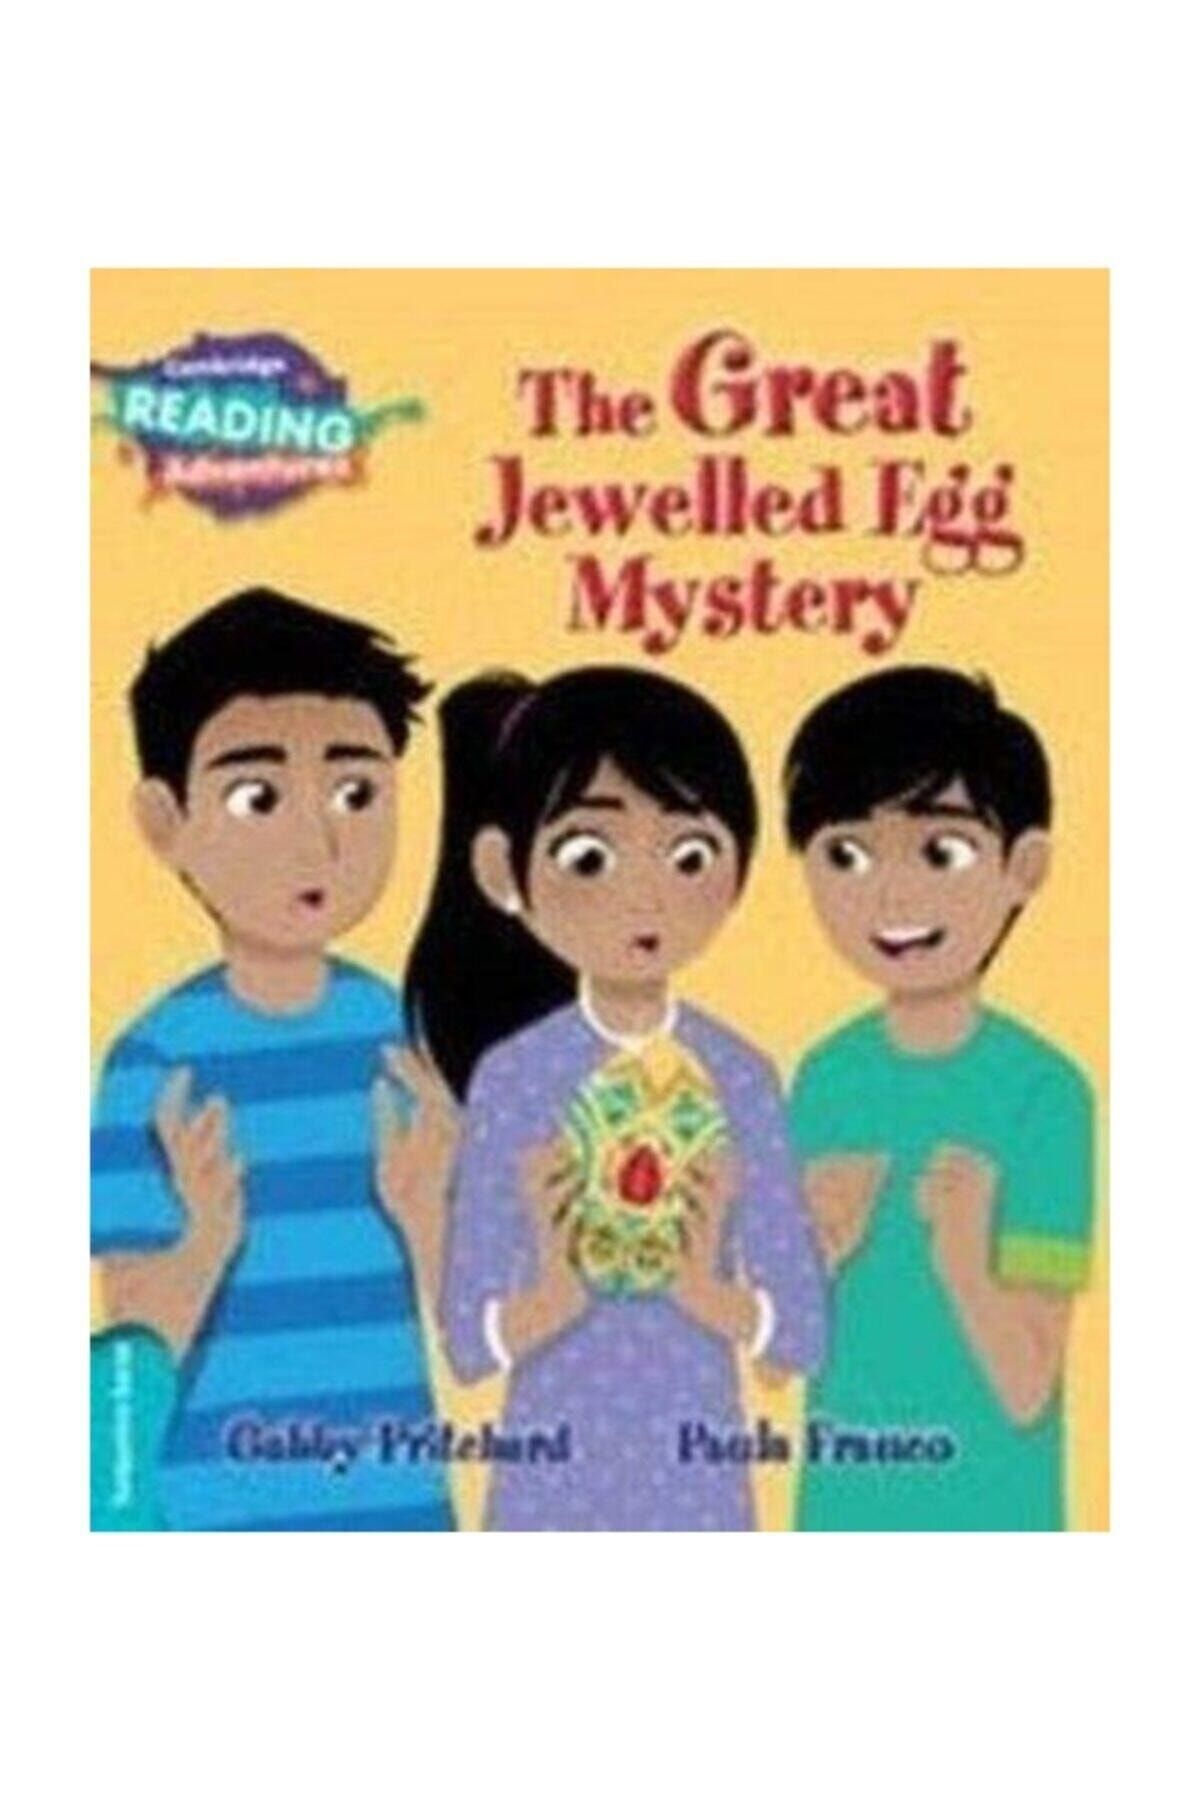 Cambridge University Turquoise Band- The Great Jewelled Egg Mystery Reading Adventures Gabby Pritchard